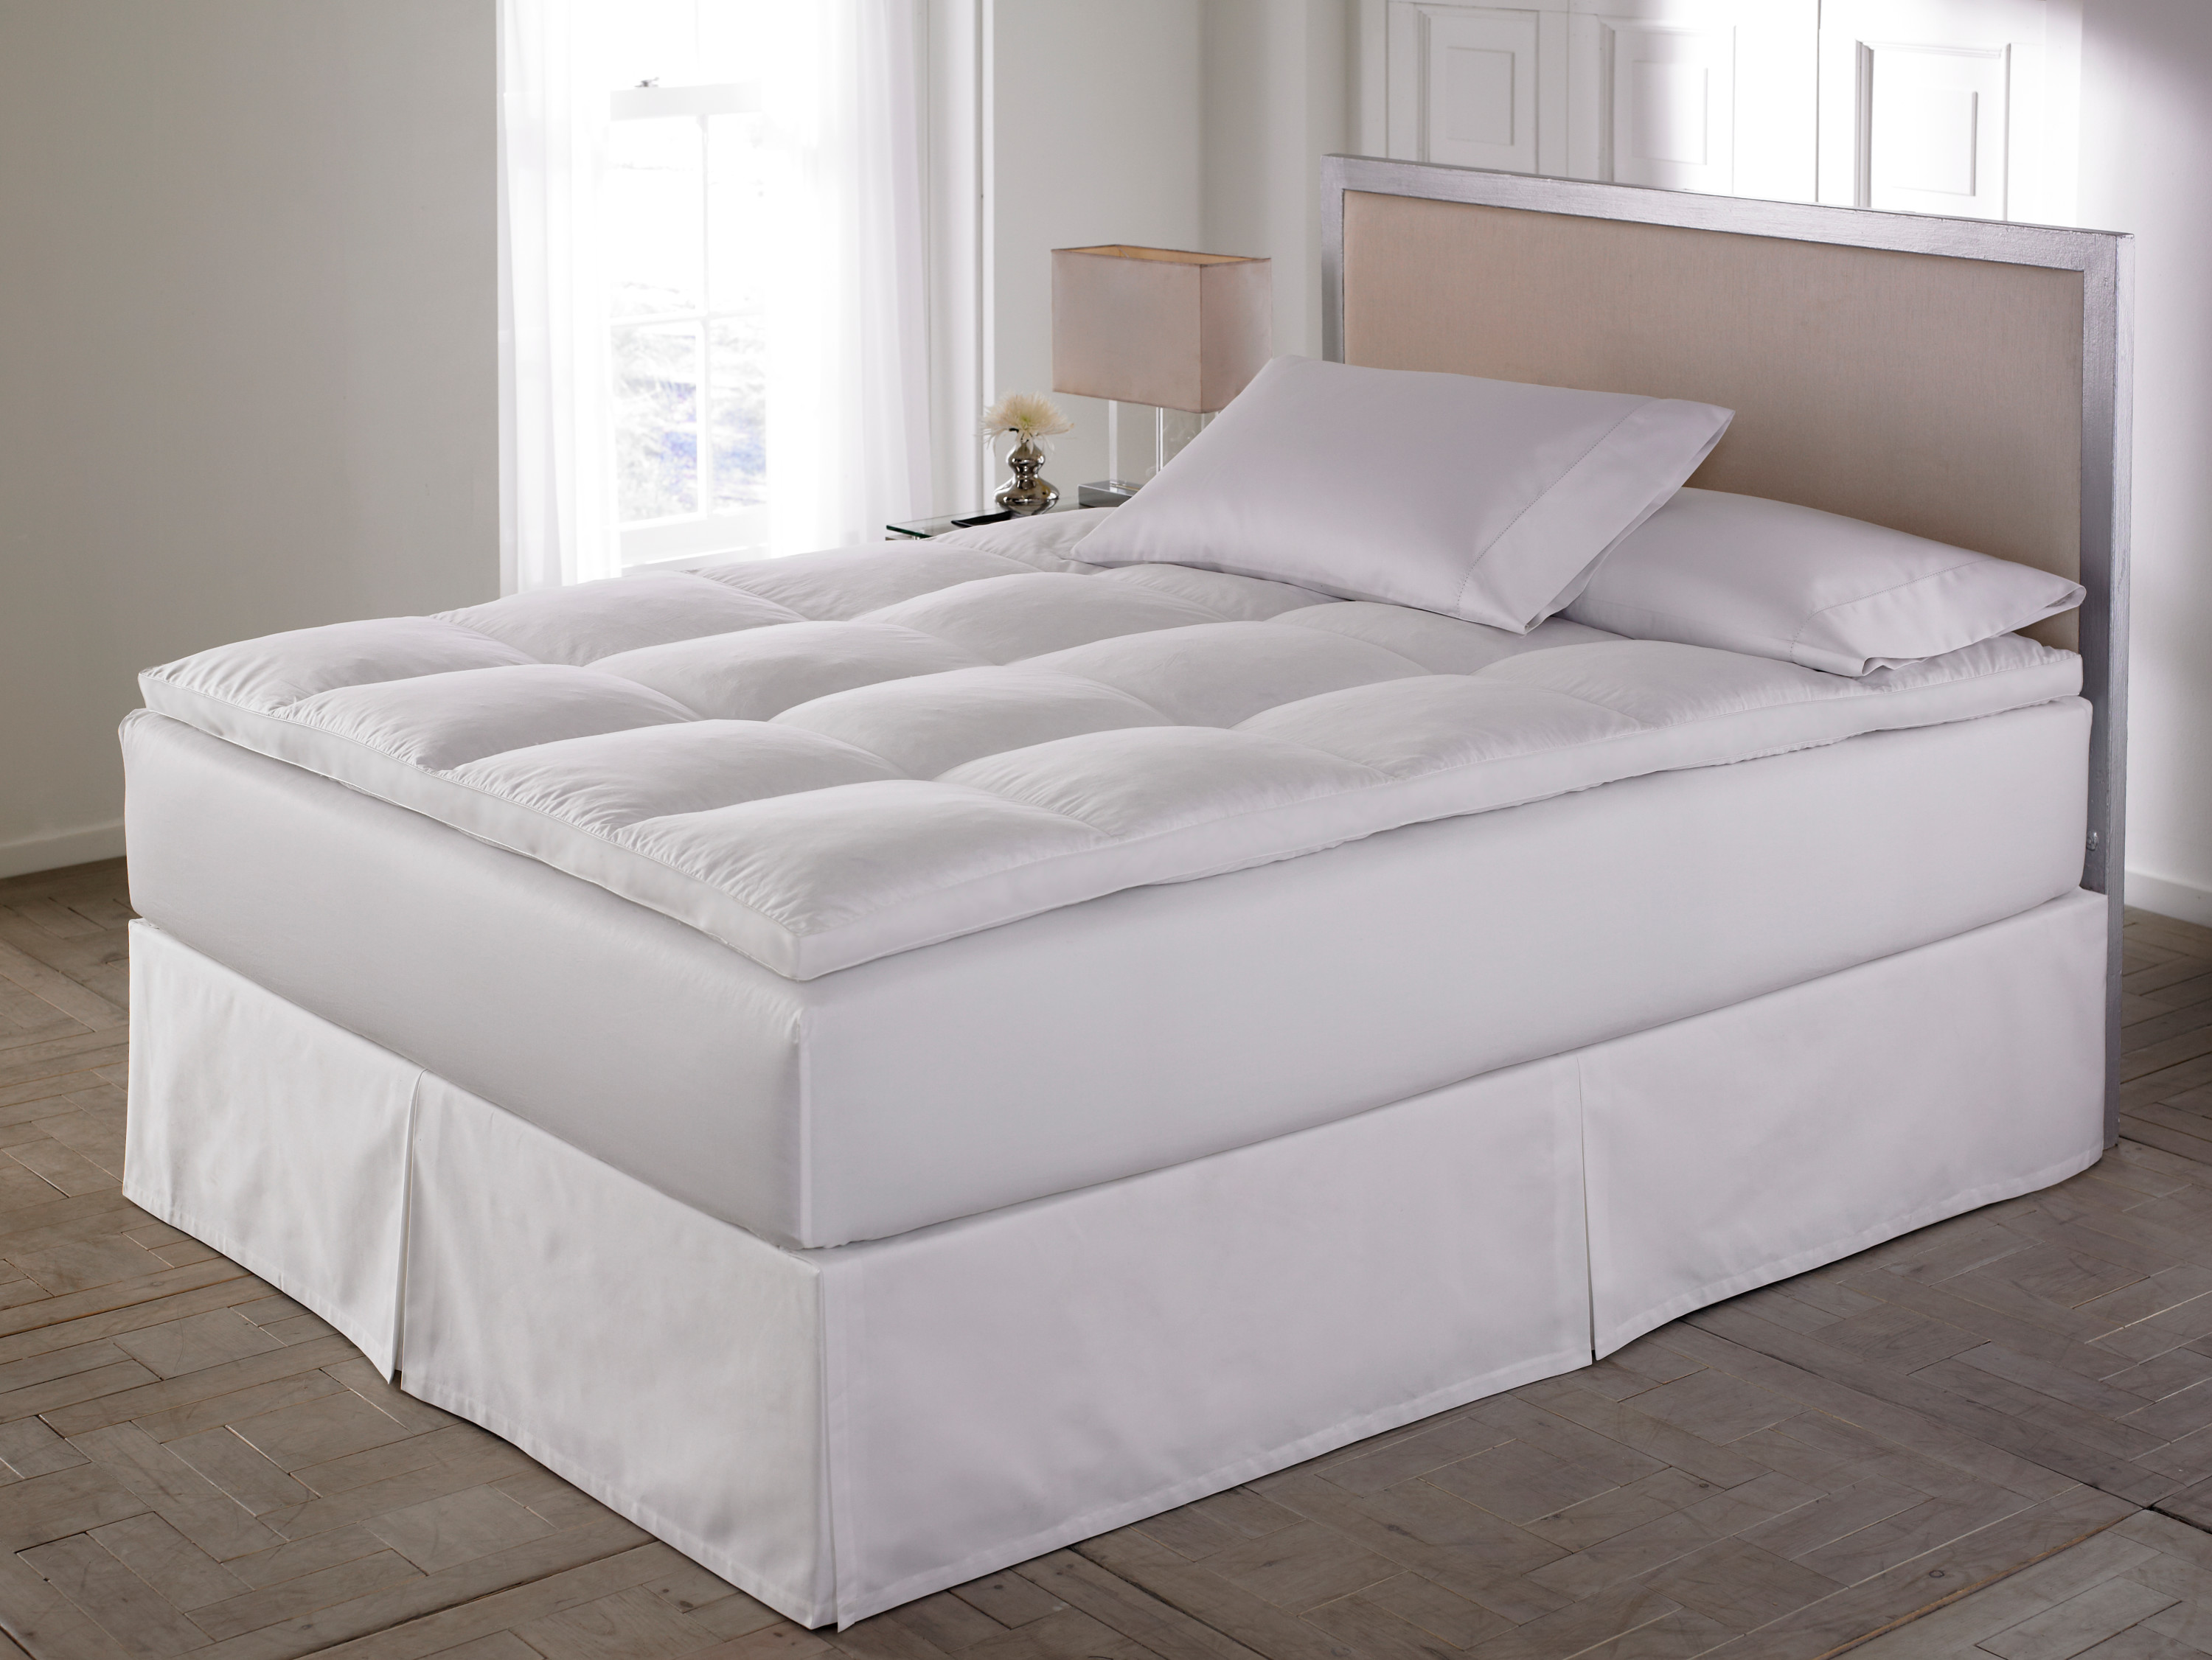 Dreamy Nights 233TC Cotton Feather and Fiber Bed in Multiple sizes - image 5 of 8